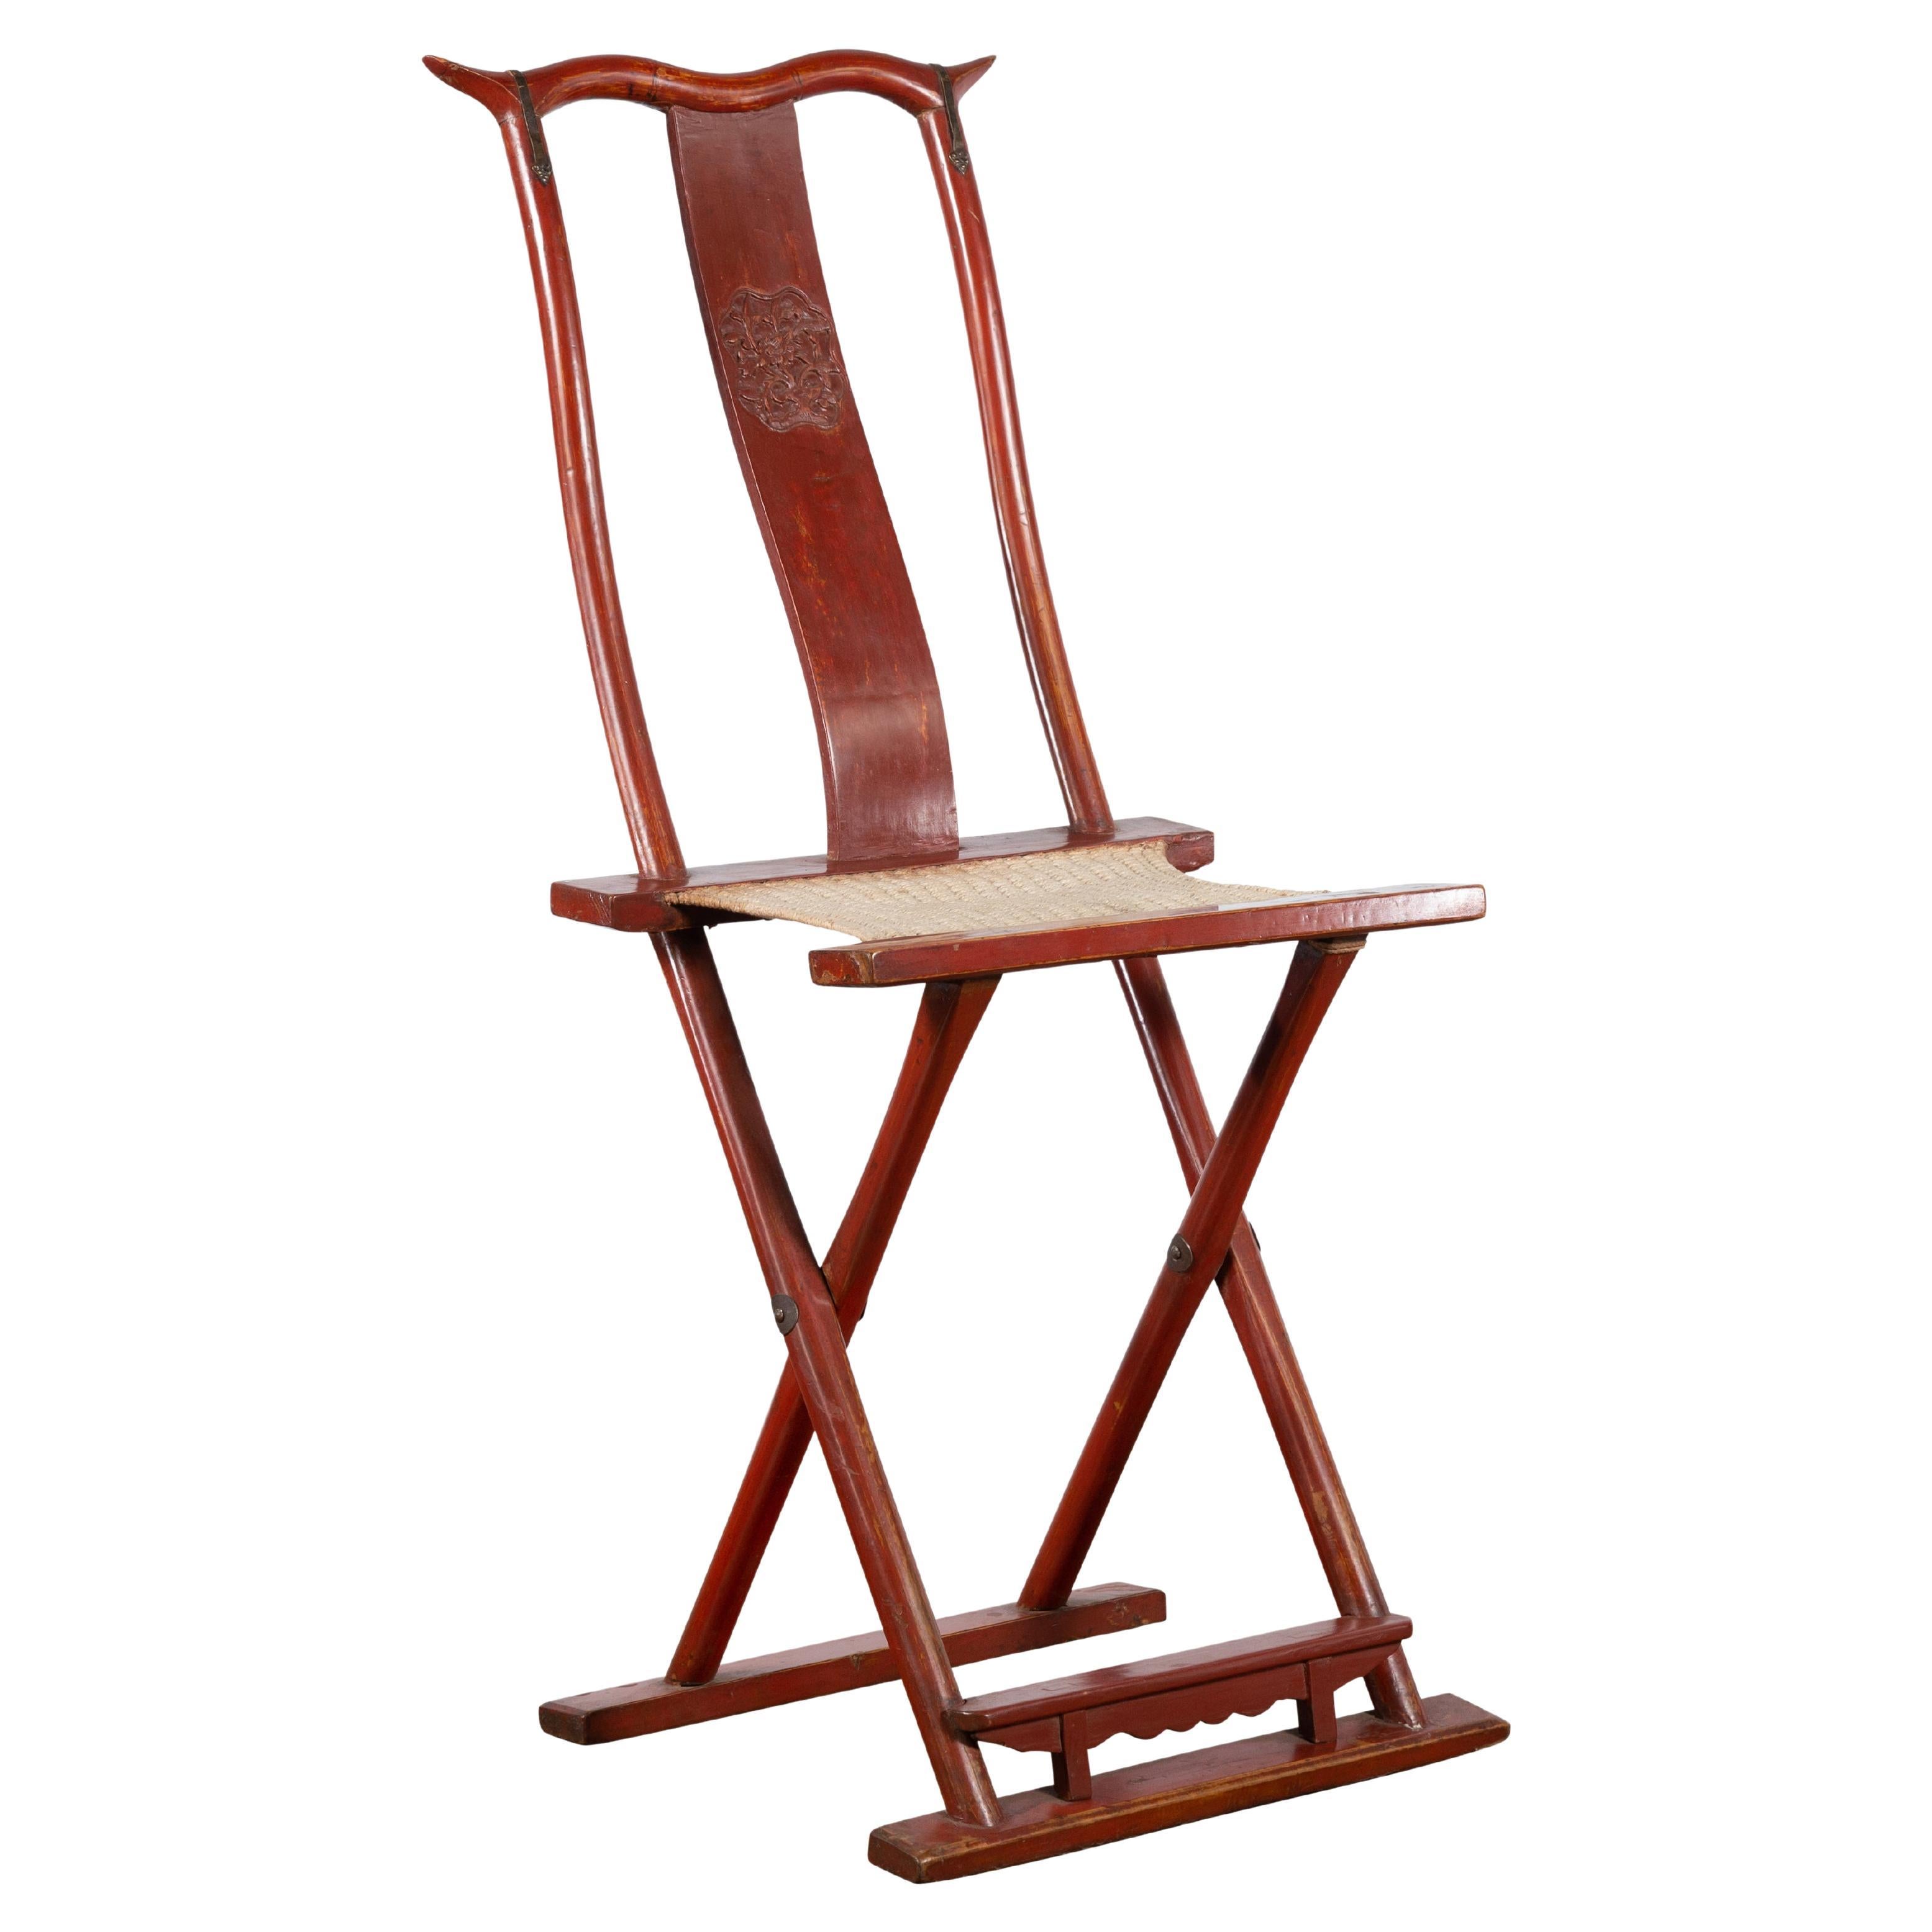 Chinese Early 20th Century Red Lacquer Traveller's Folding Chair with Woven Seat For Sale